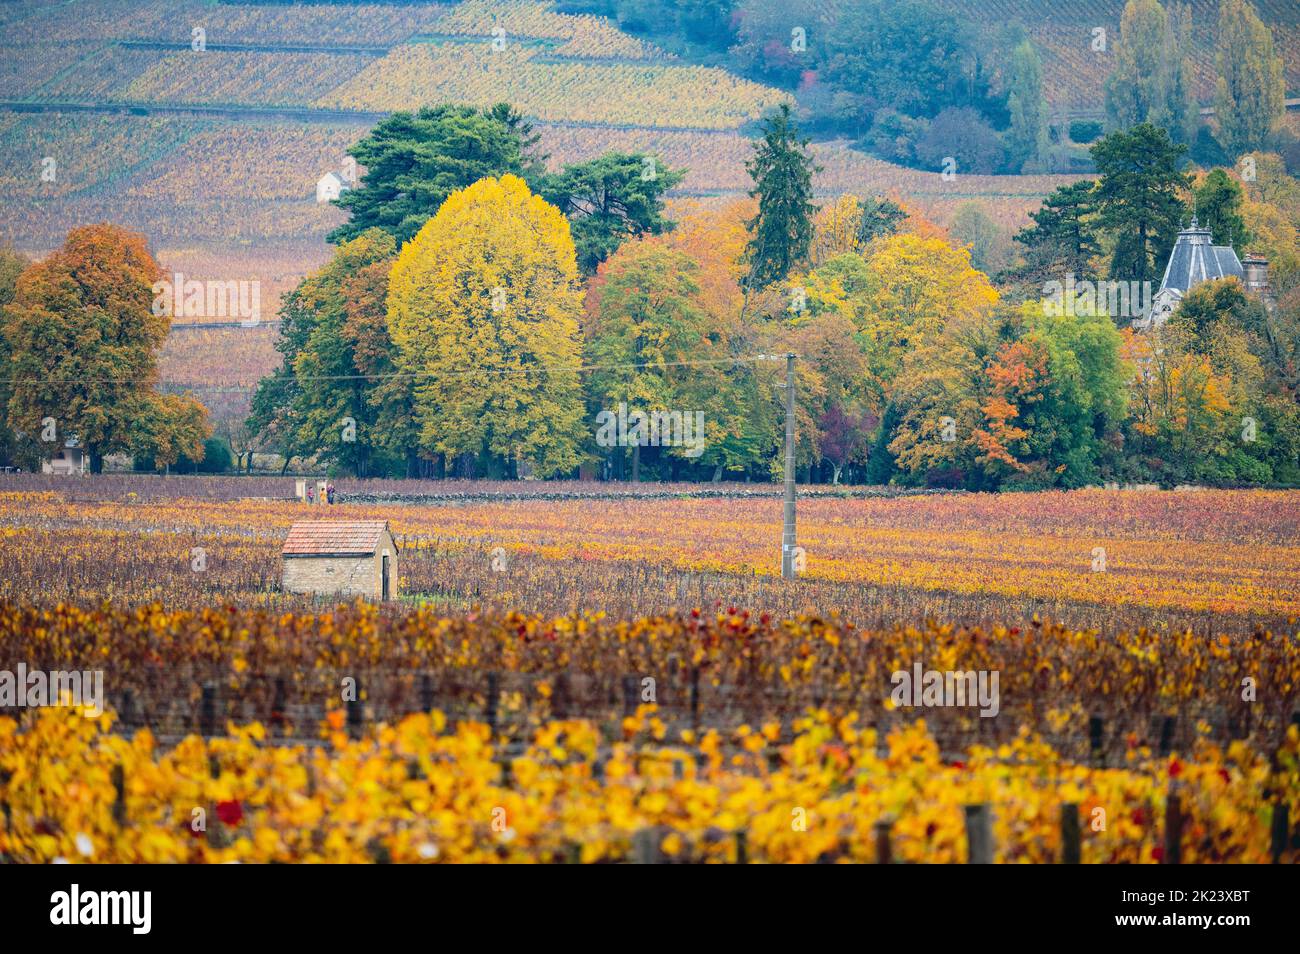 Vineyards in Burgundy, France. Autumn colors Stock Photo